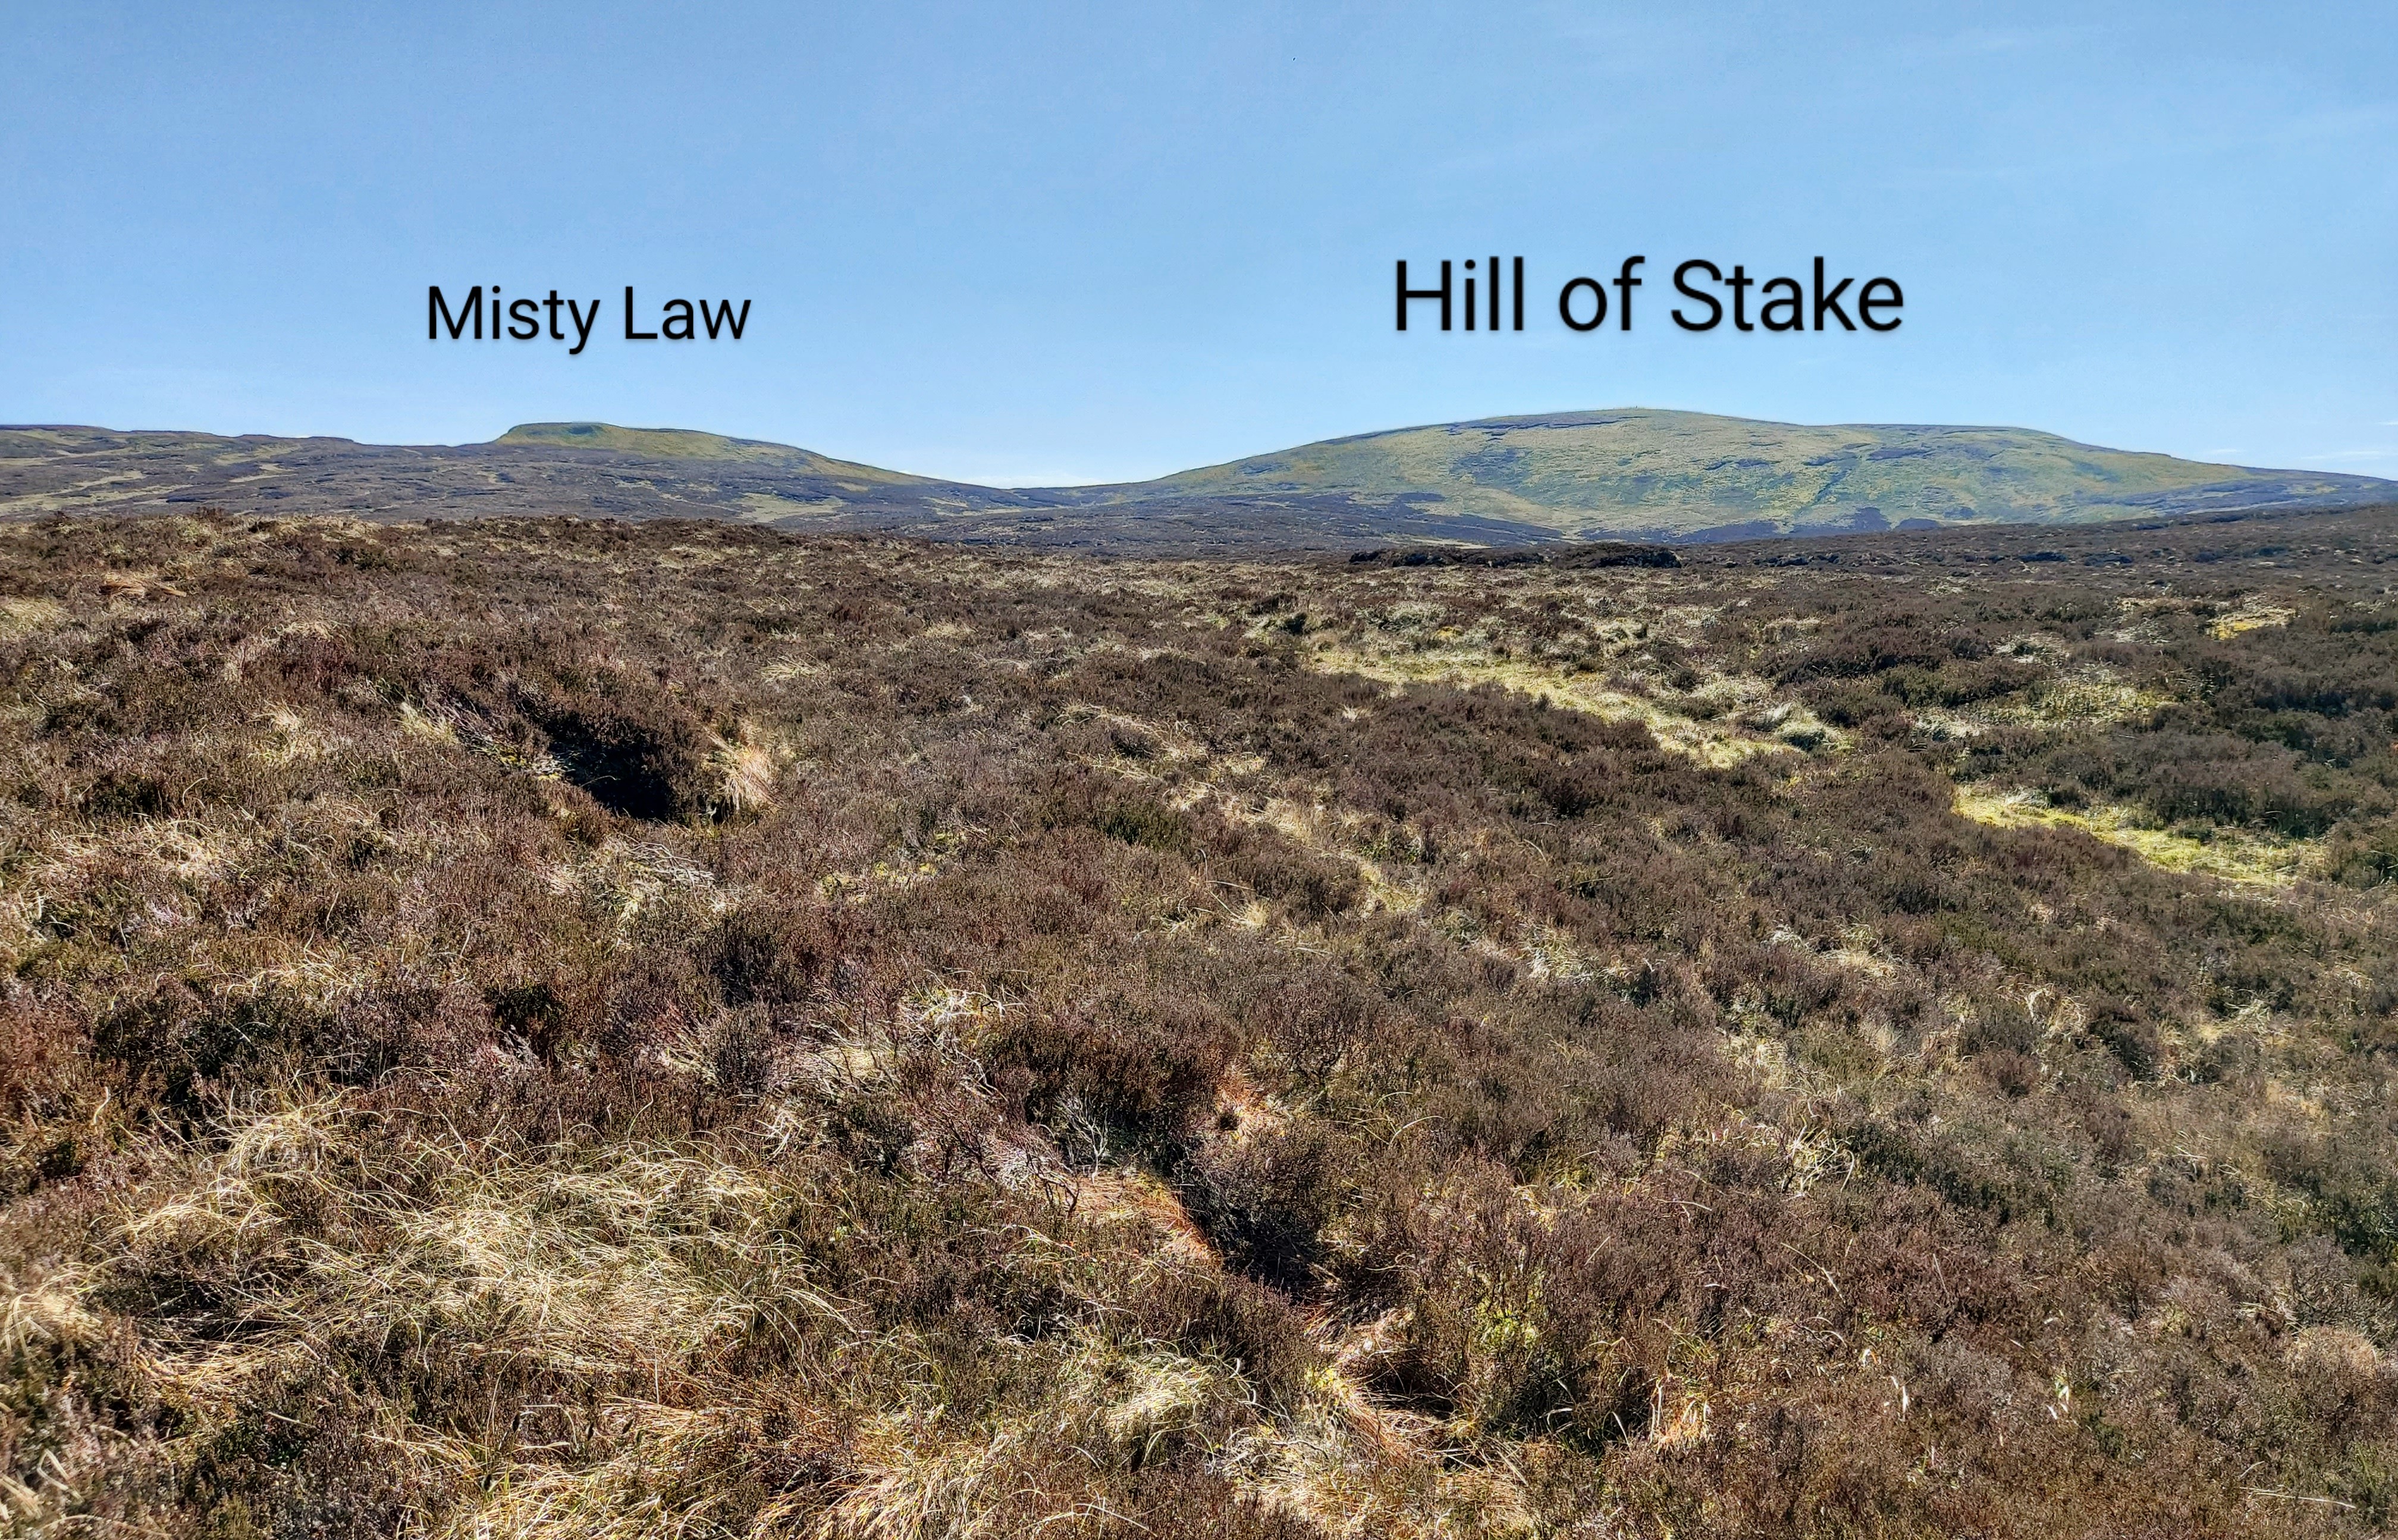 Hill of Stake and Misty Law looking south across the Queenside Muir